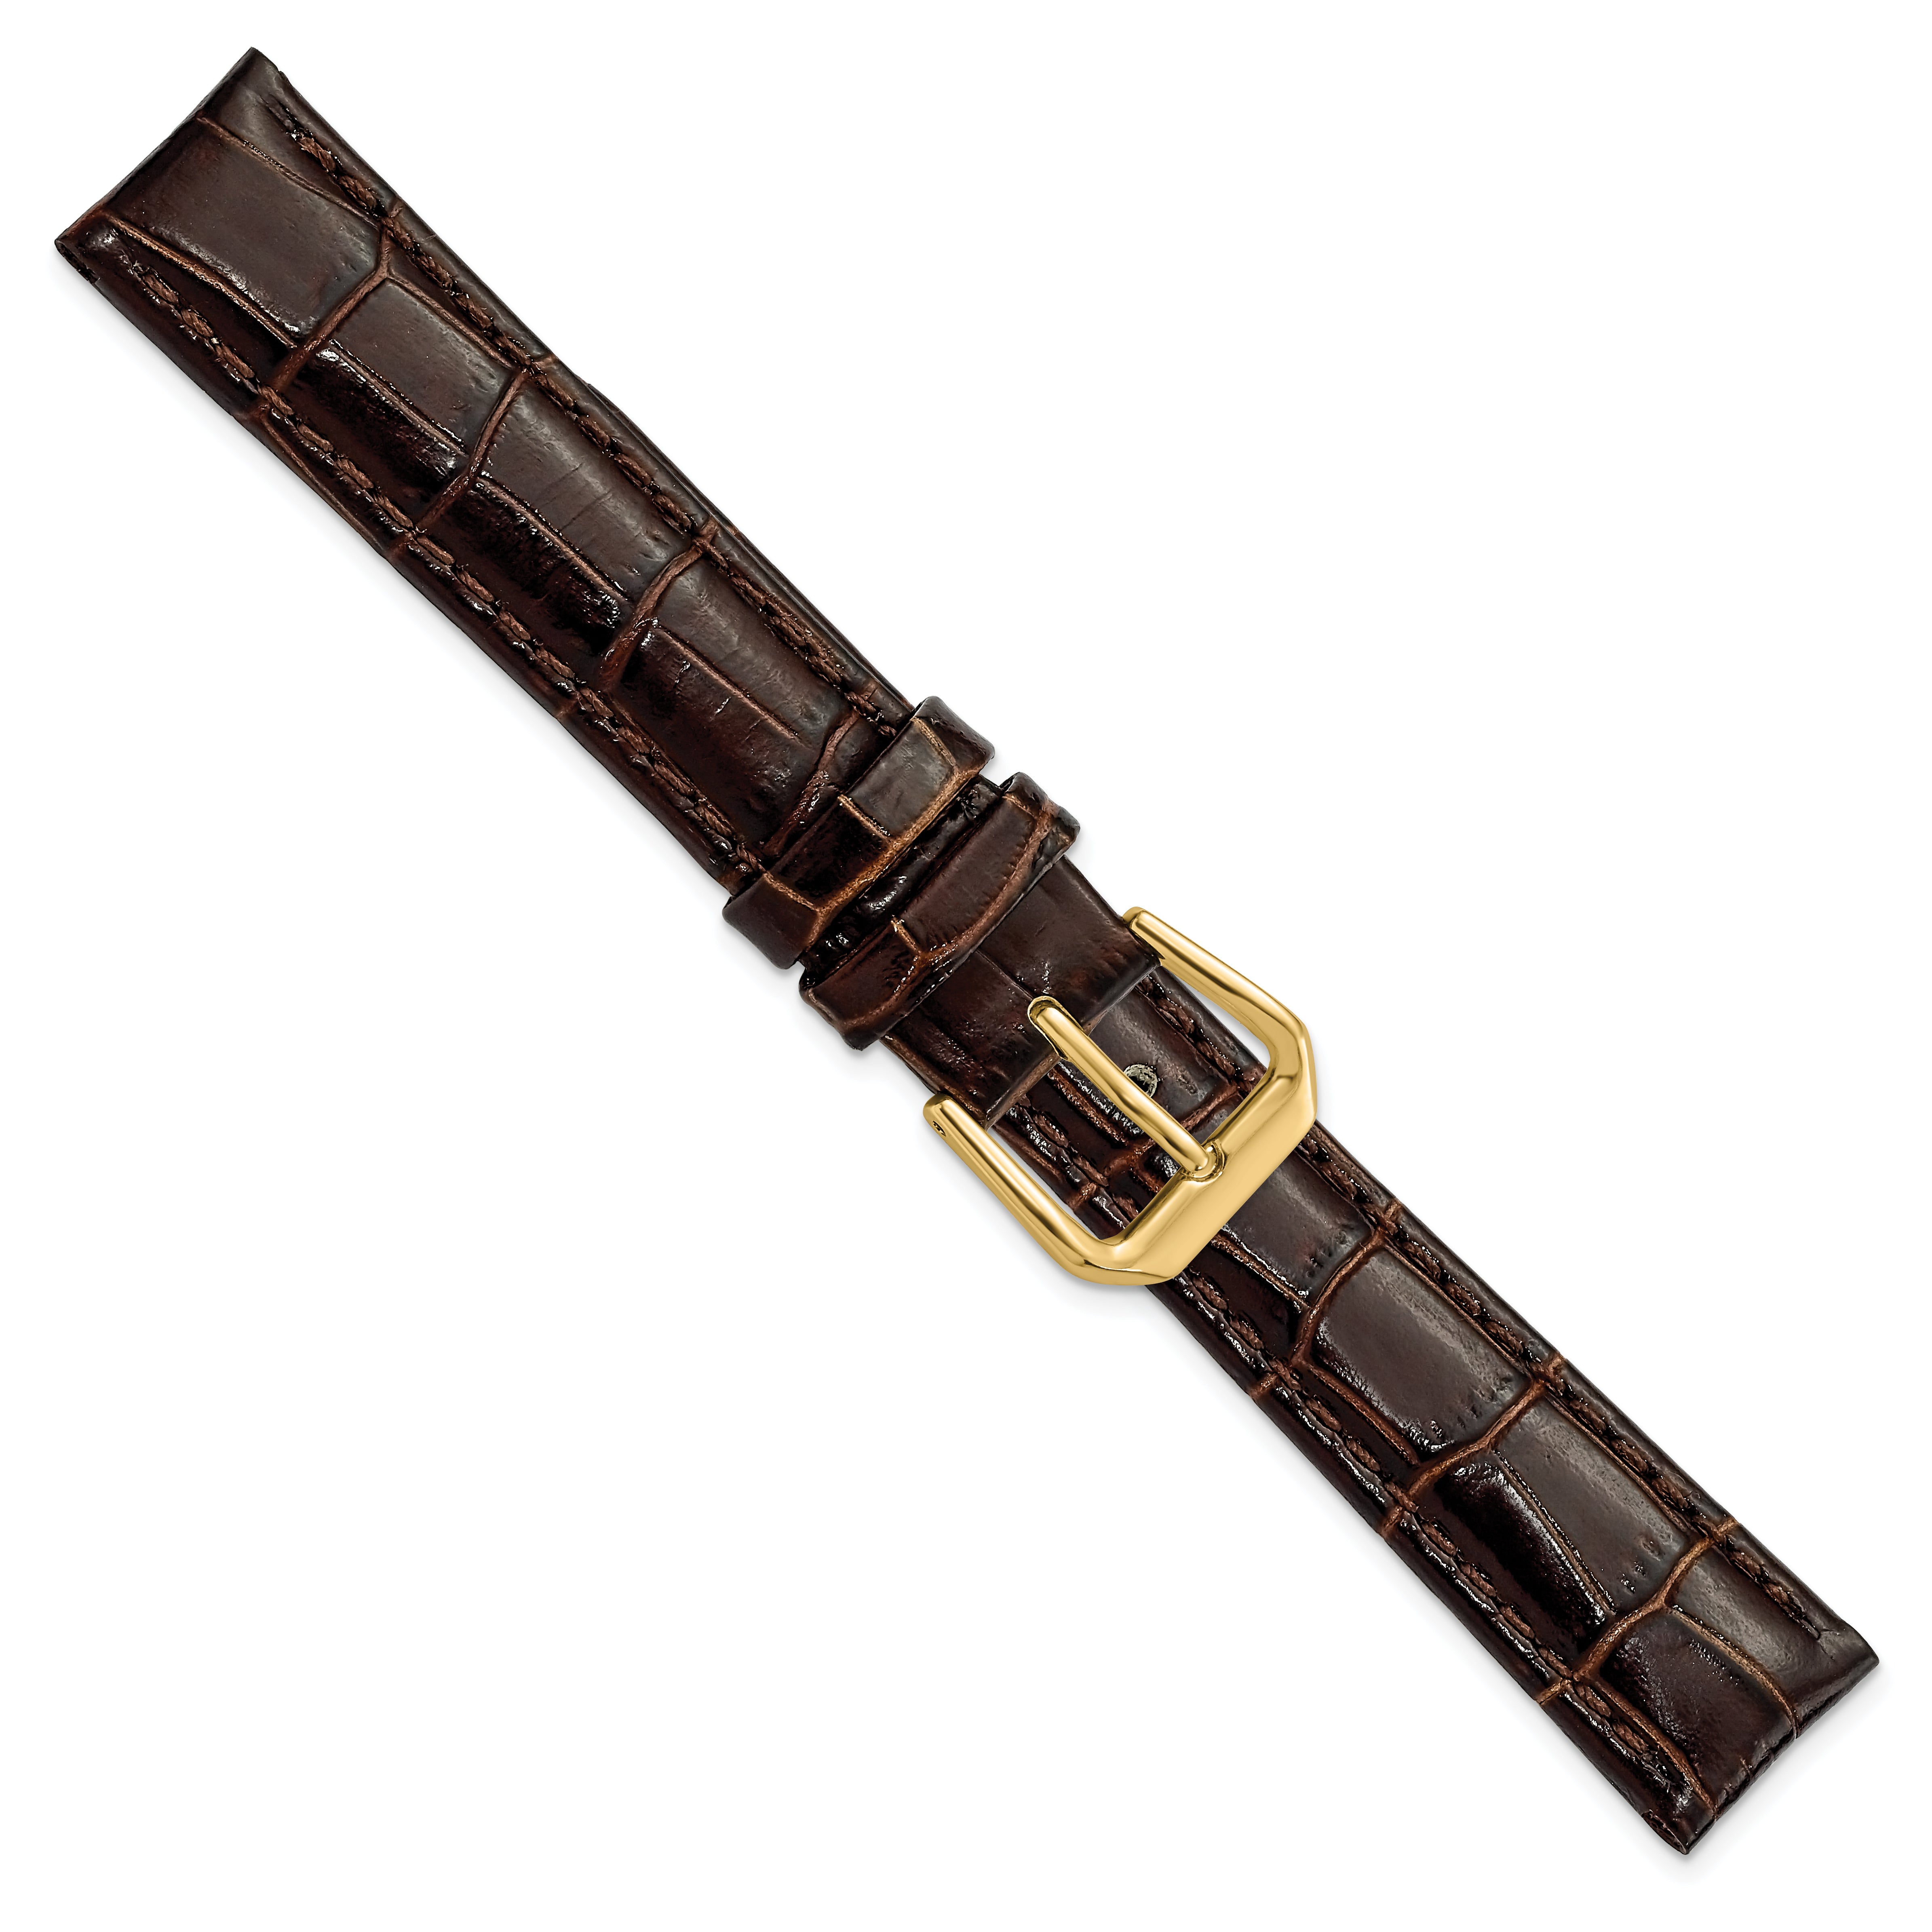 10mm Brown Crocodile Grain Leather with Dark Stitching and Gold-tone Buckle 6.75 inch Watch Band